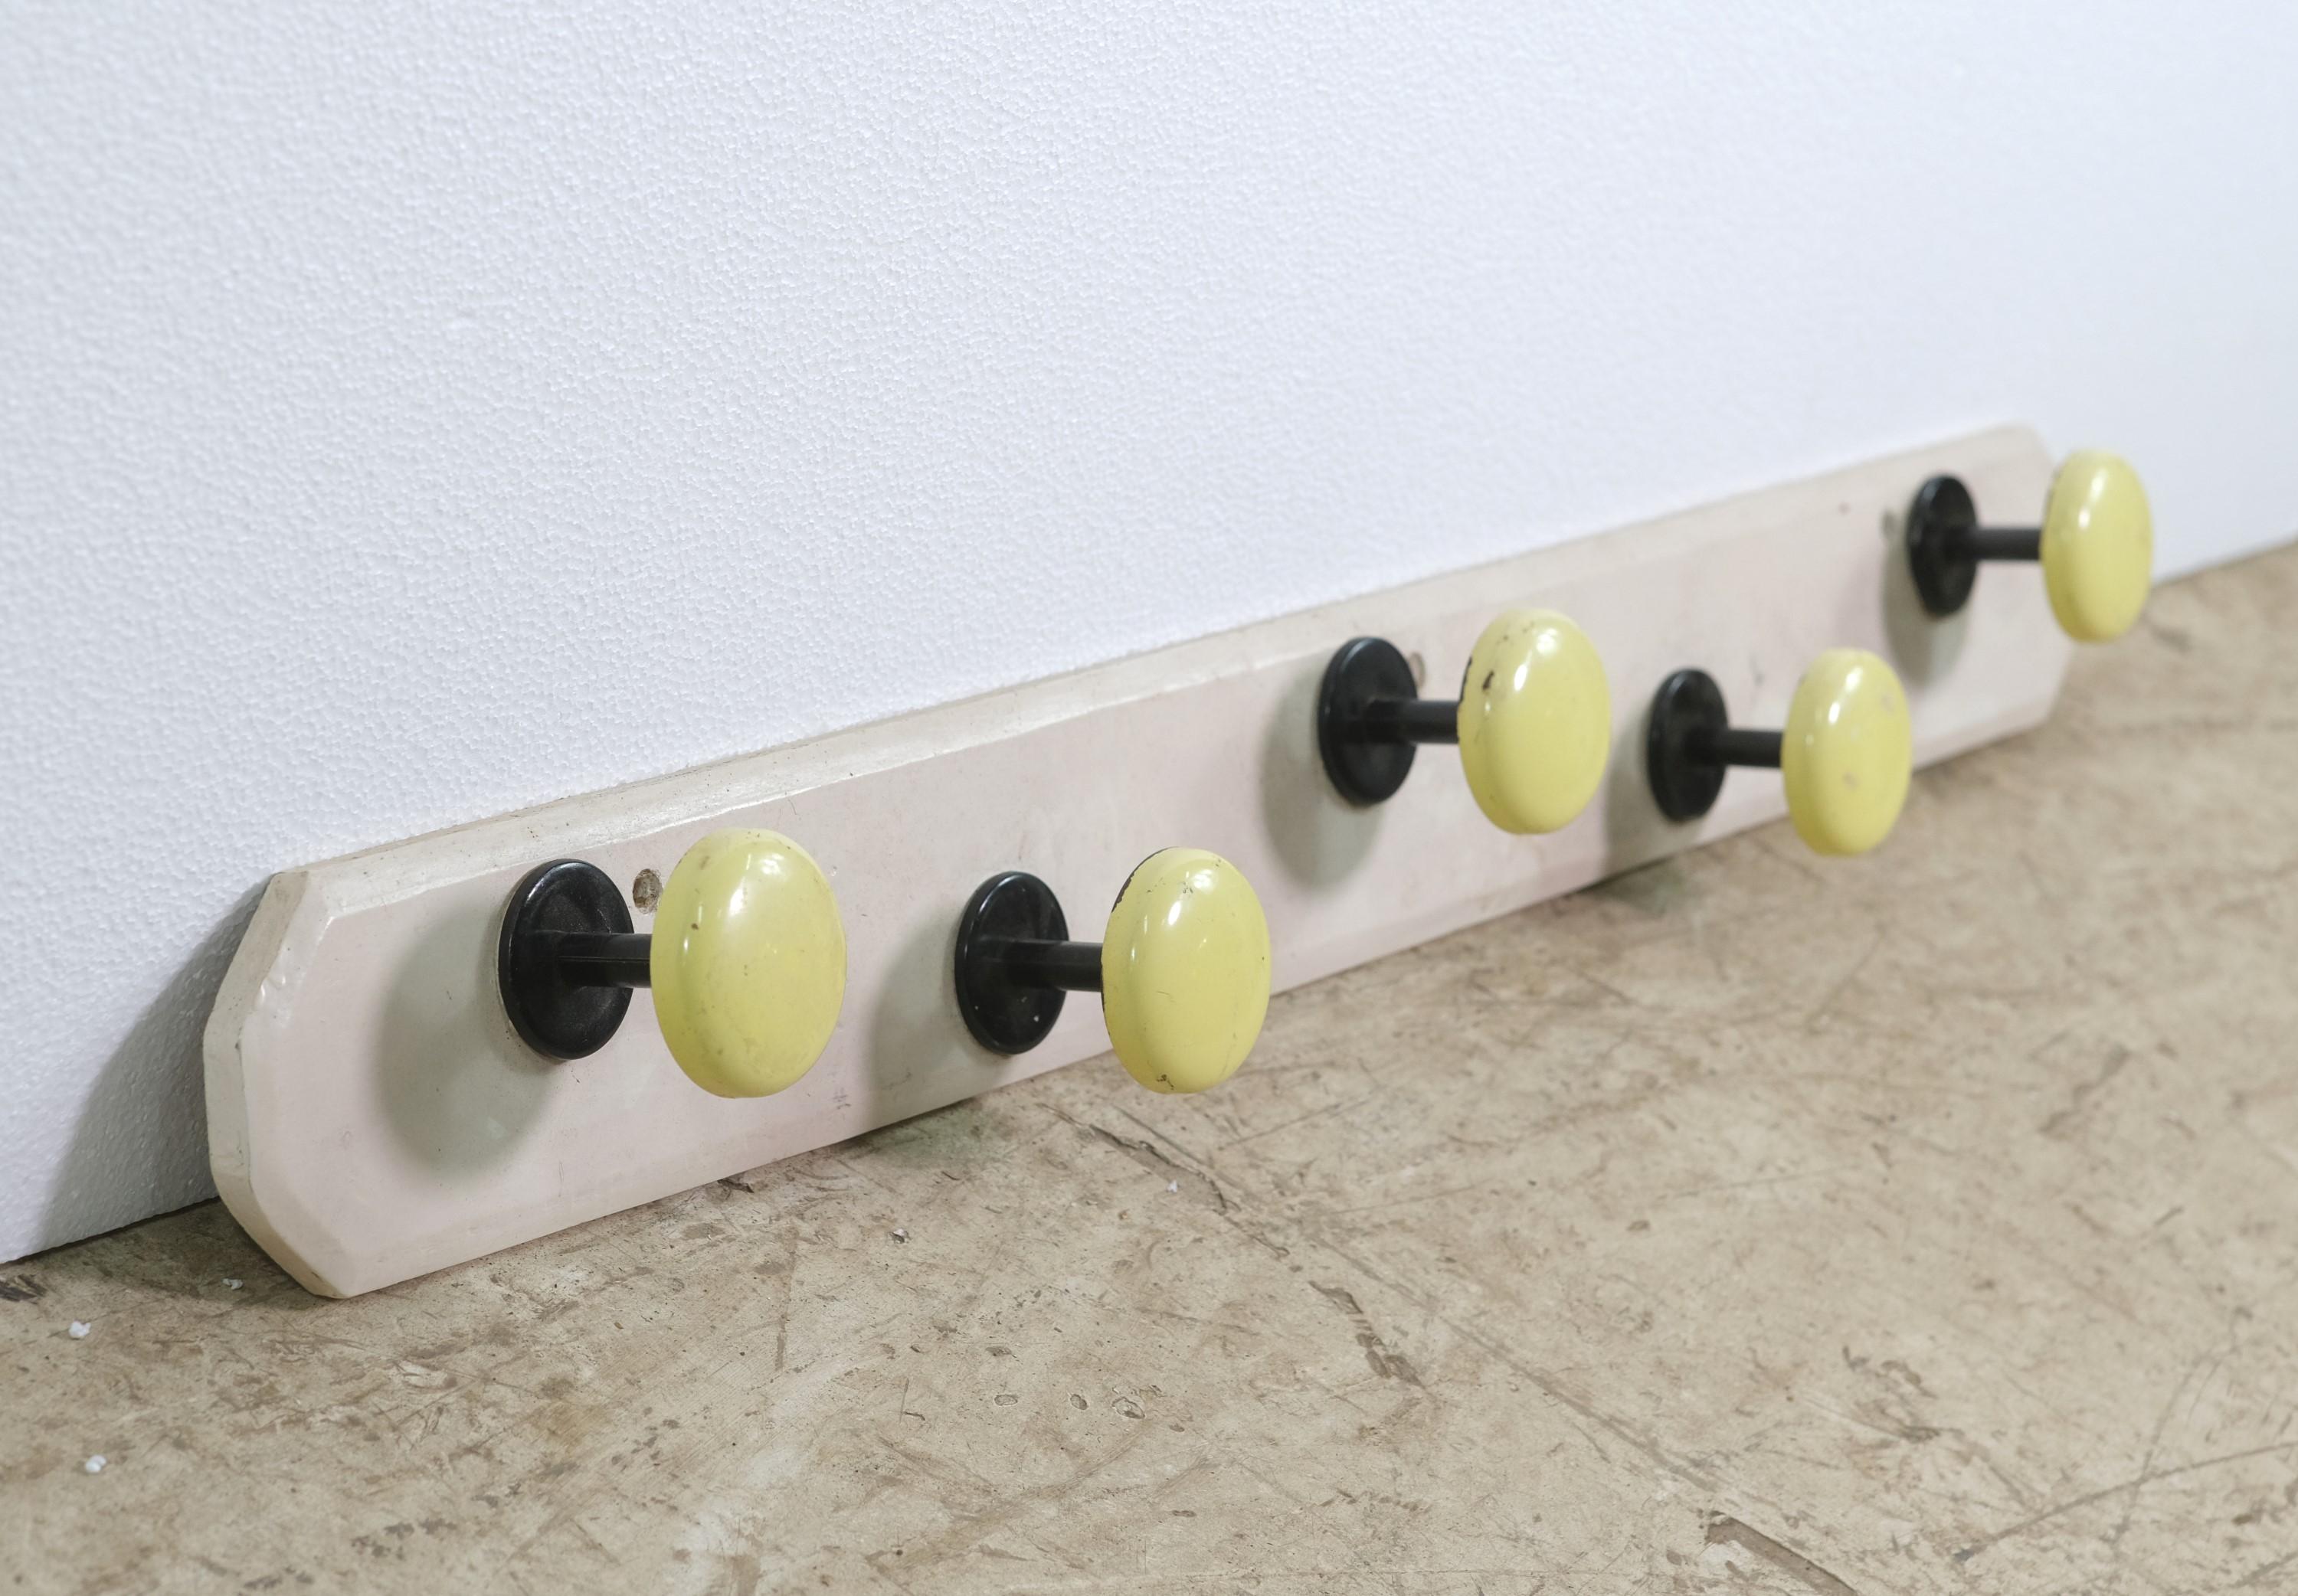 Wall mounted coat rack featuring 5 steel round hooks in a yellow finish. The backing plate is wood done in a white color. From Europe. Please note, this item is located in our Scranton, PA location.